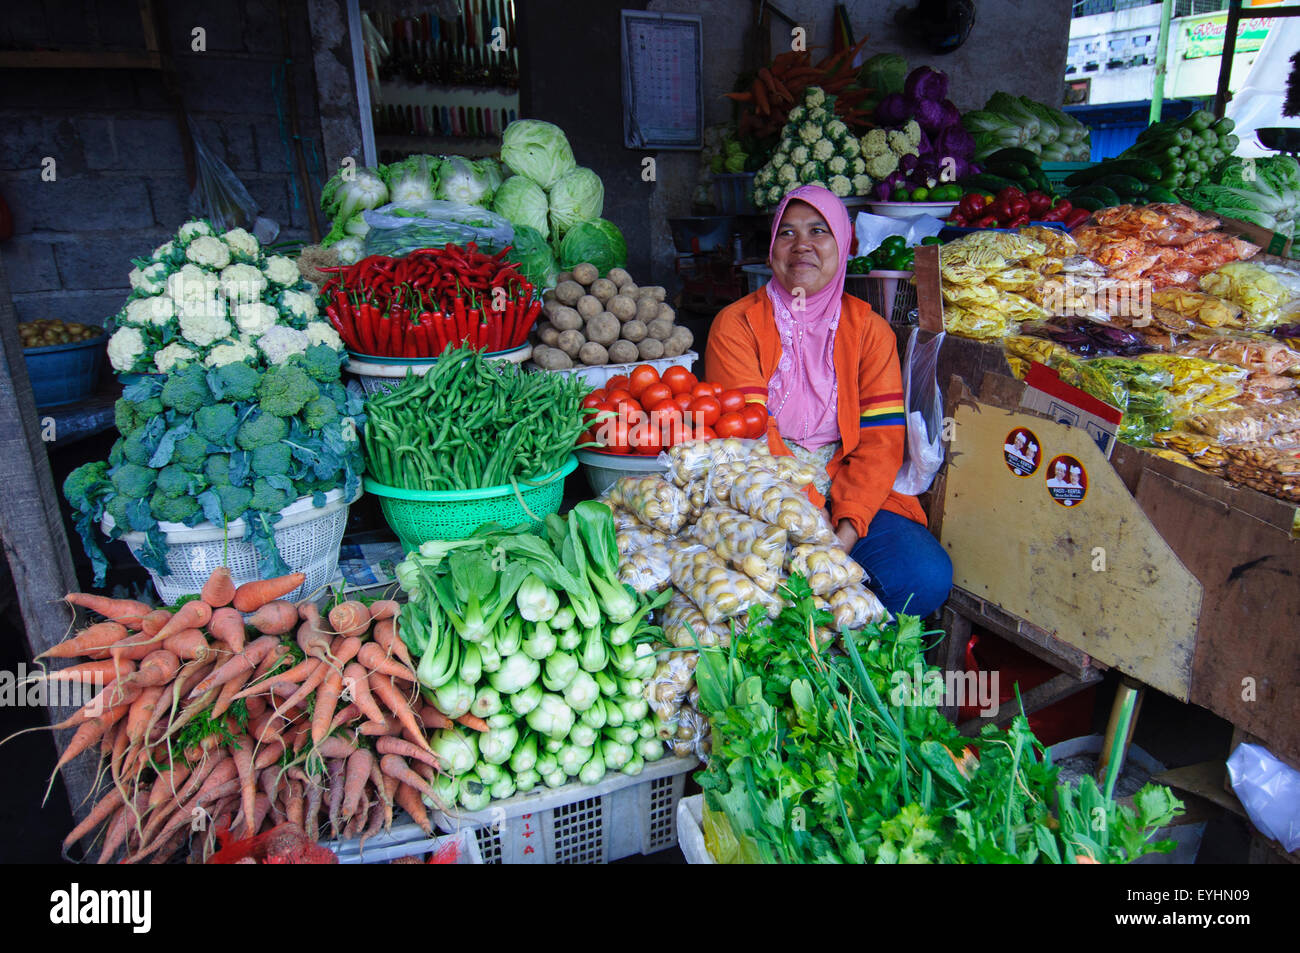 A vegetable seller and her wares, Bedugul, Bali, Indonesia (No MR) Stock Photo